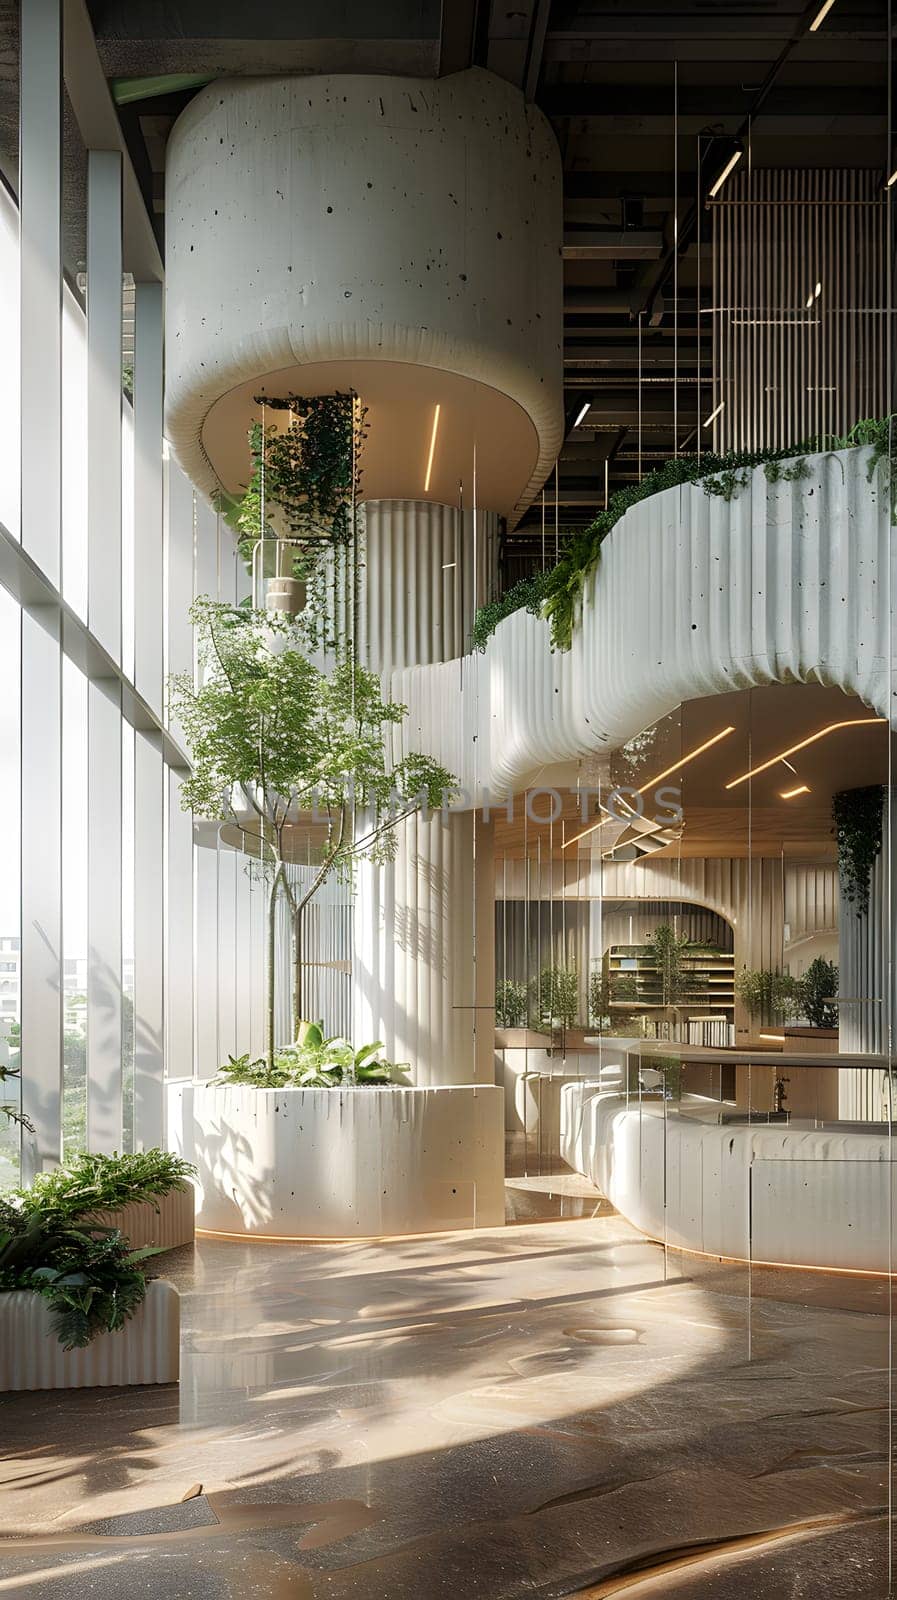 A spacious room with numerous windows and hanging plants, adding a touch of greenery to the hardwood flooring and wooden facade of the building